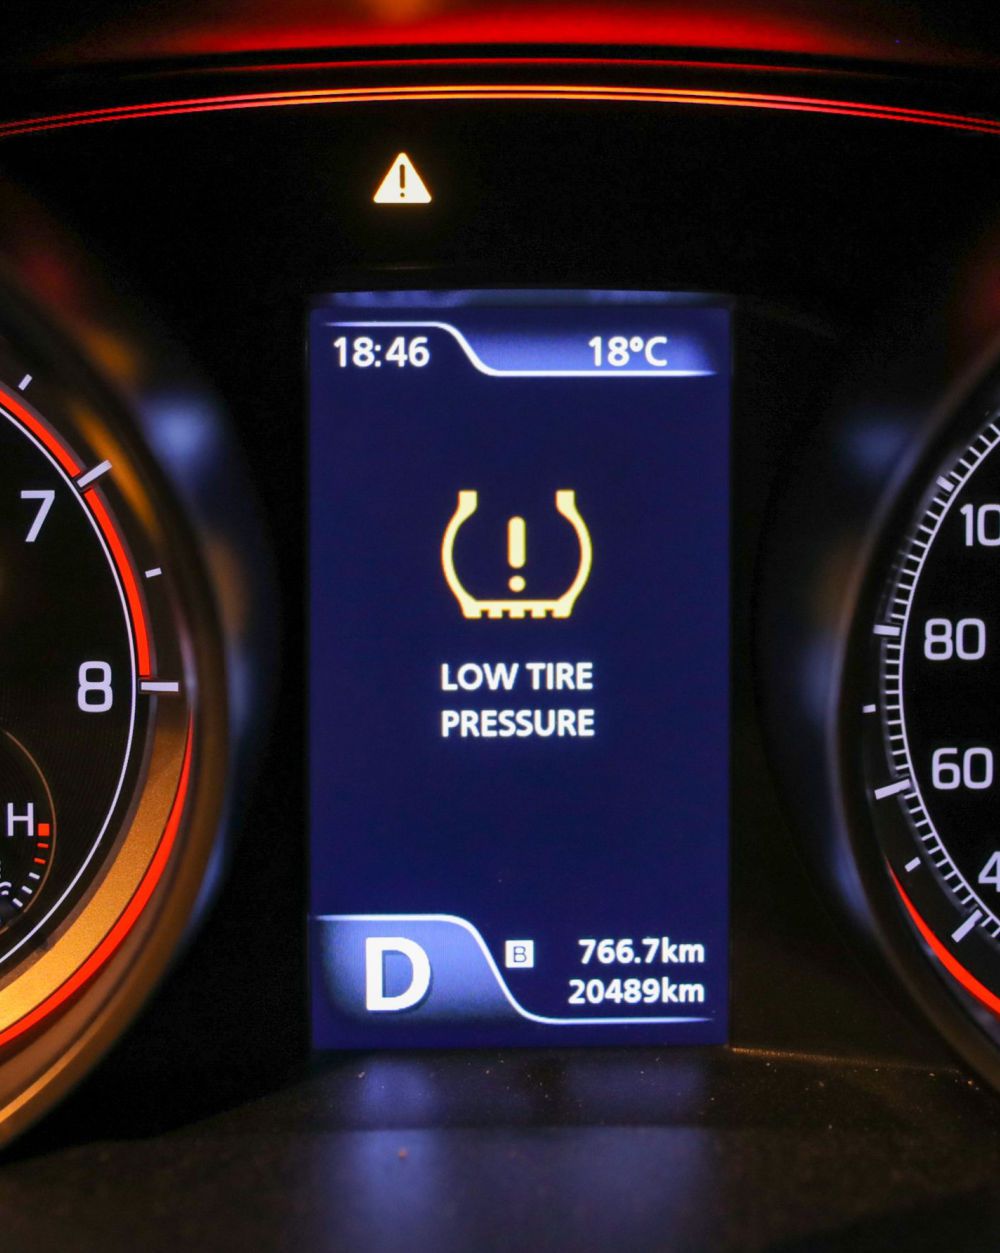 A low tire pressure warning light on the instrument cluster of a car.